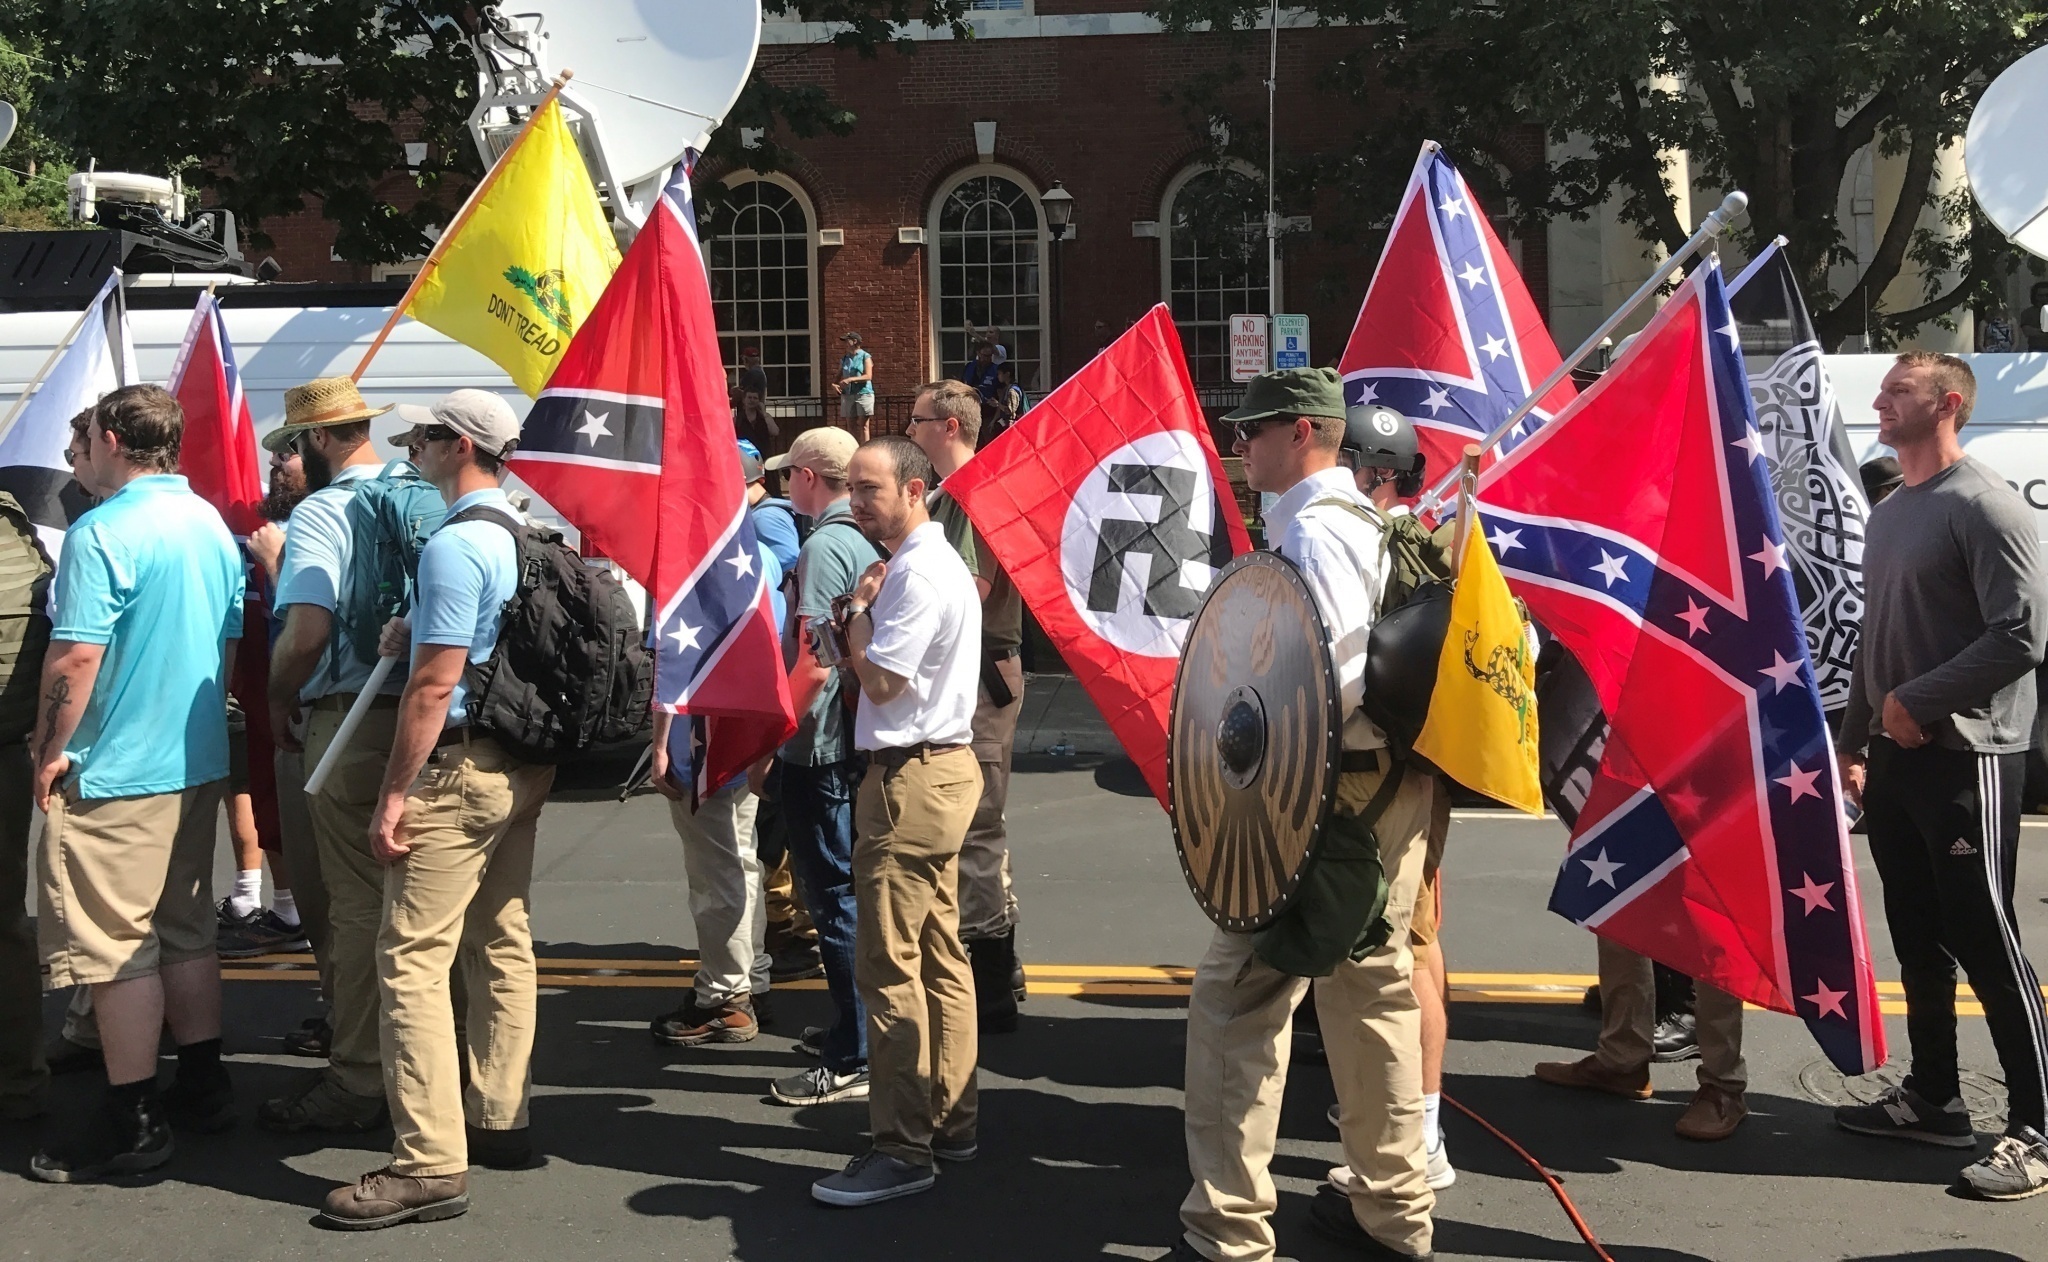 Charlottesville Unite the Right Rally 35780274914 crop - Blog